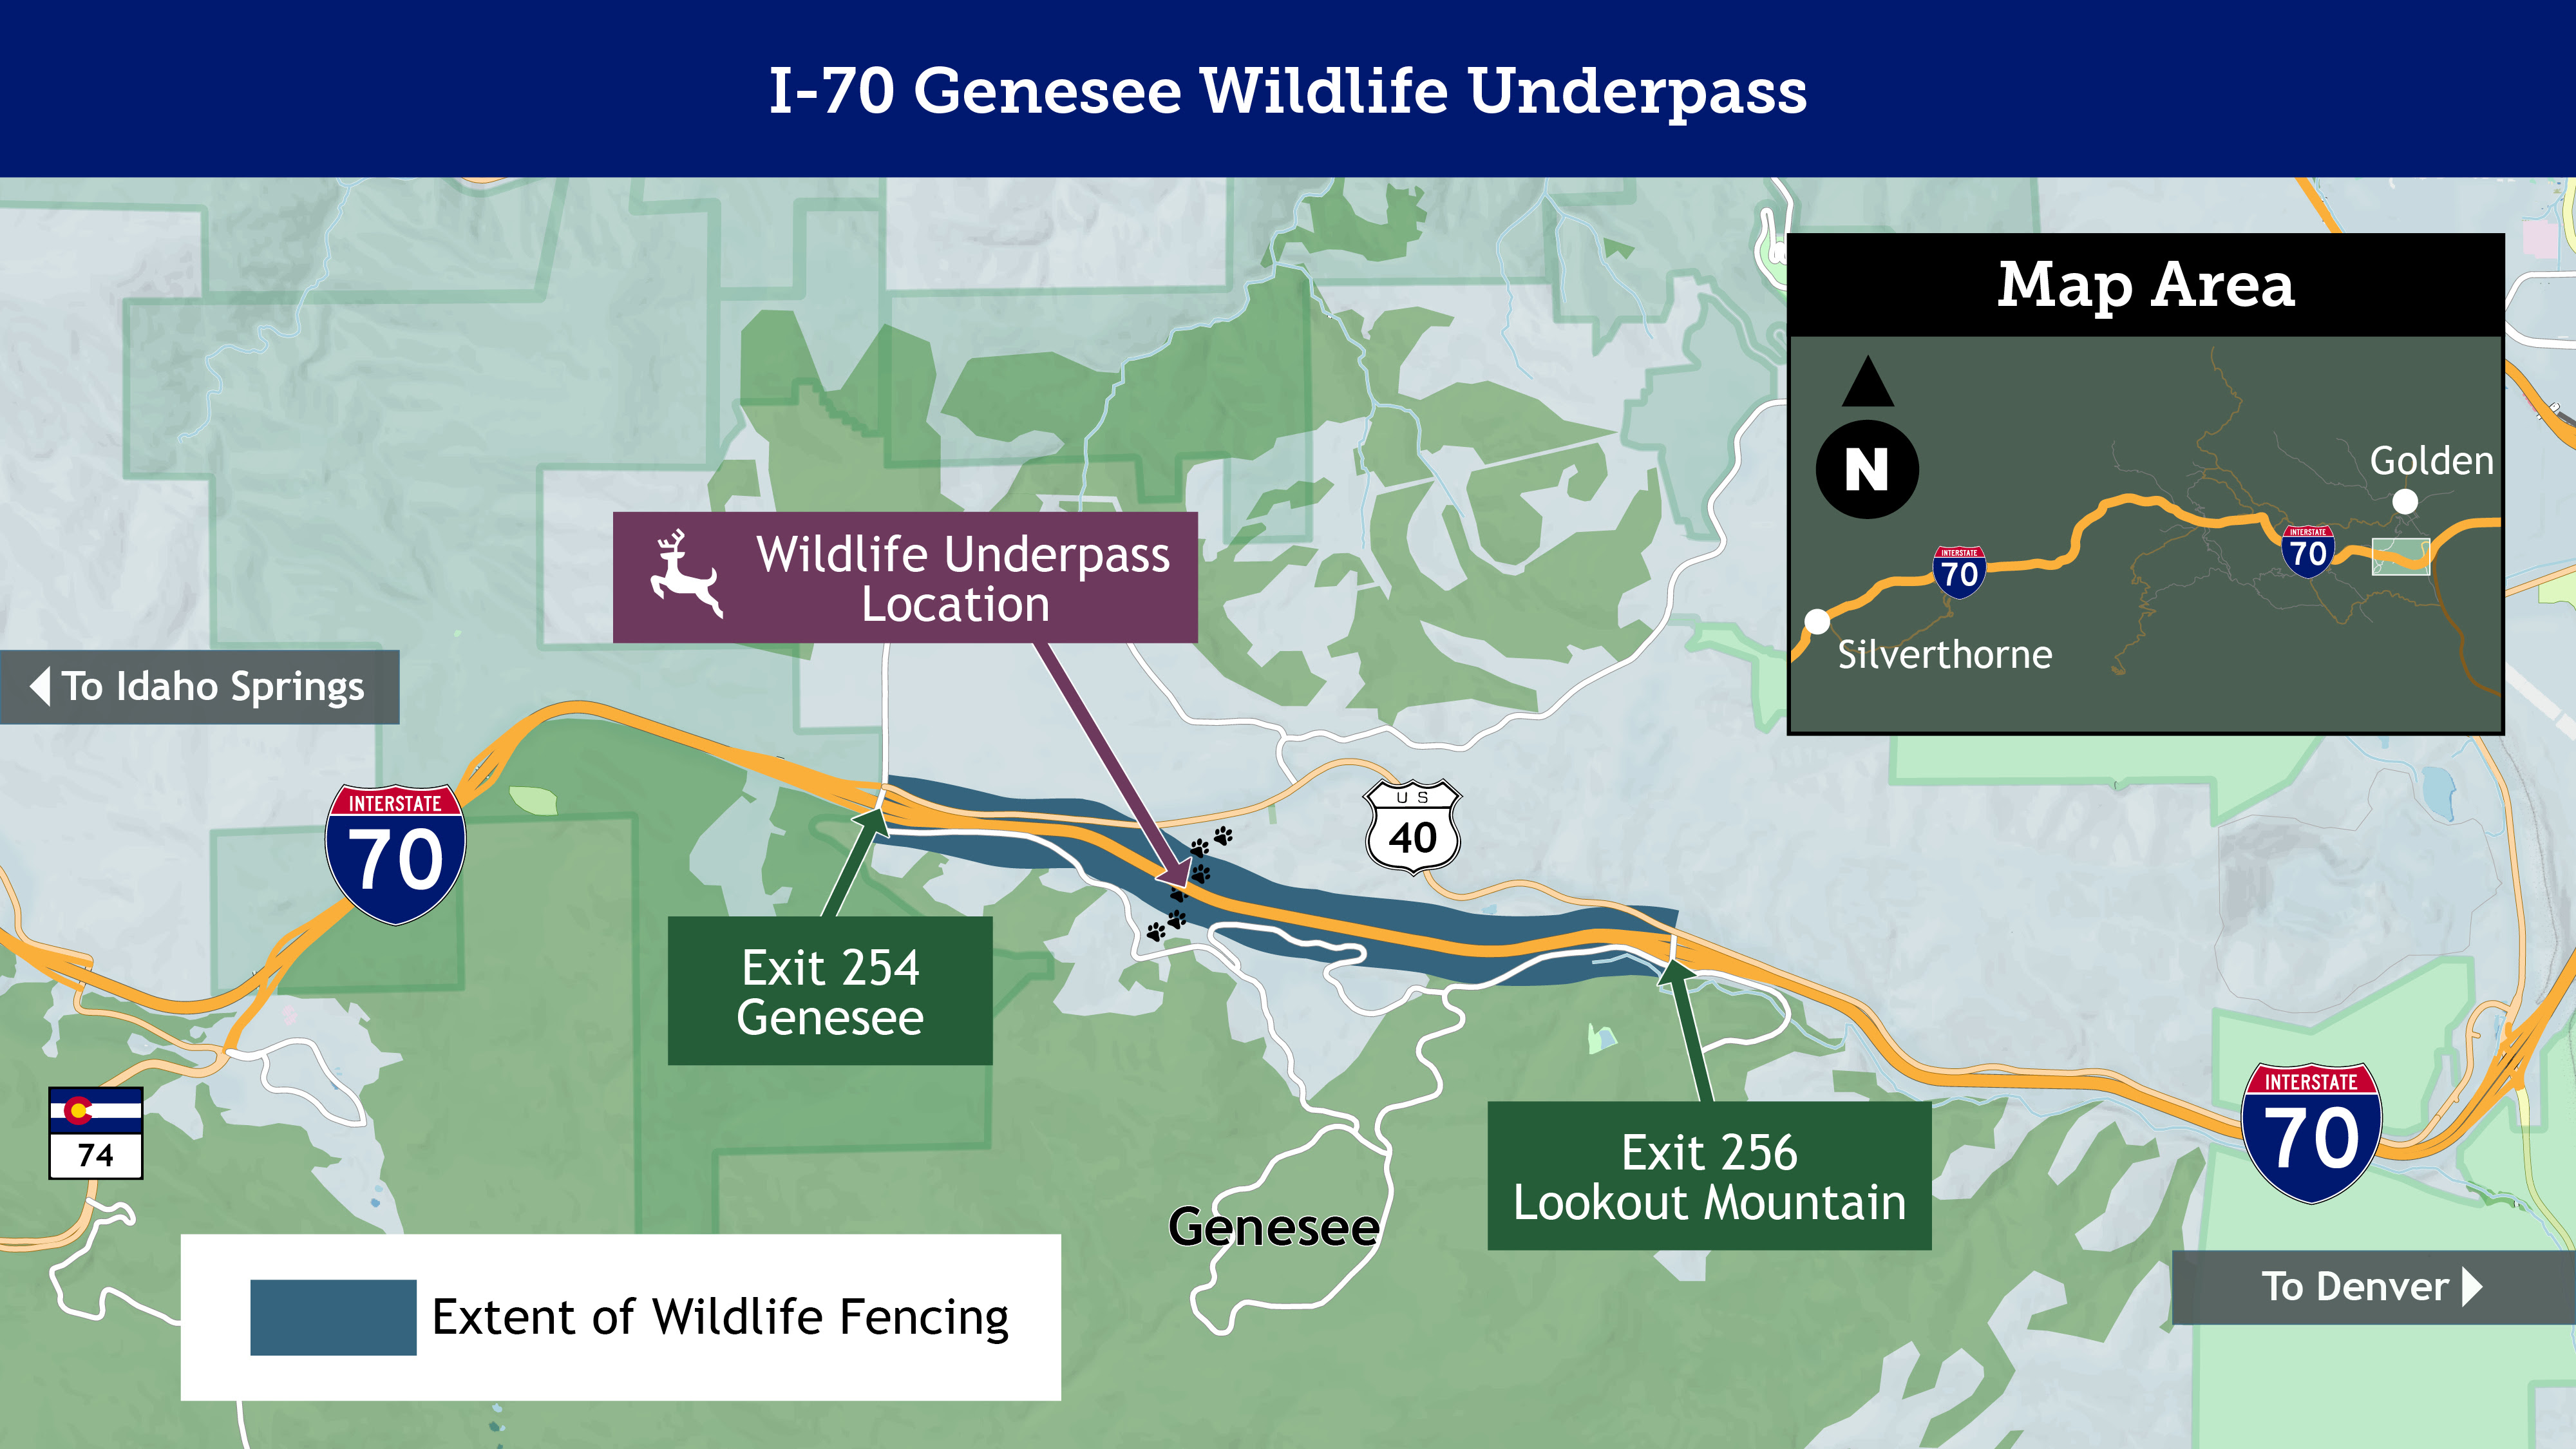 I-70 Genesee Wildlife Underpass location map detail image